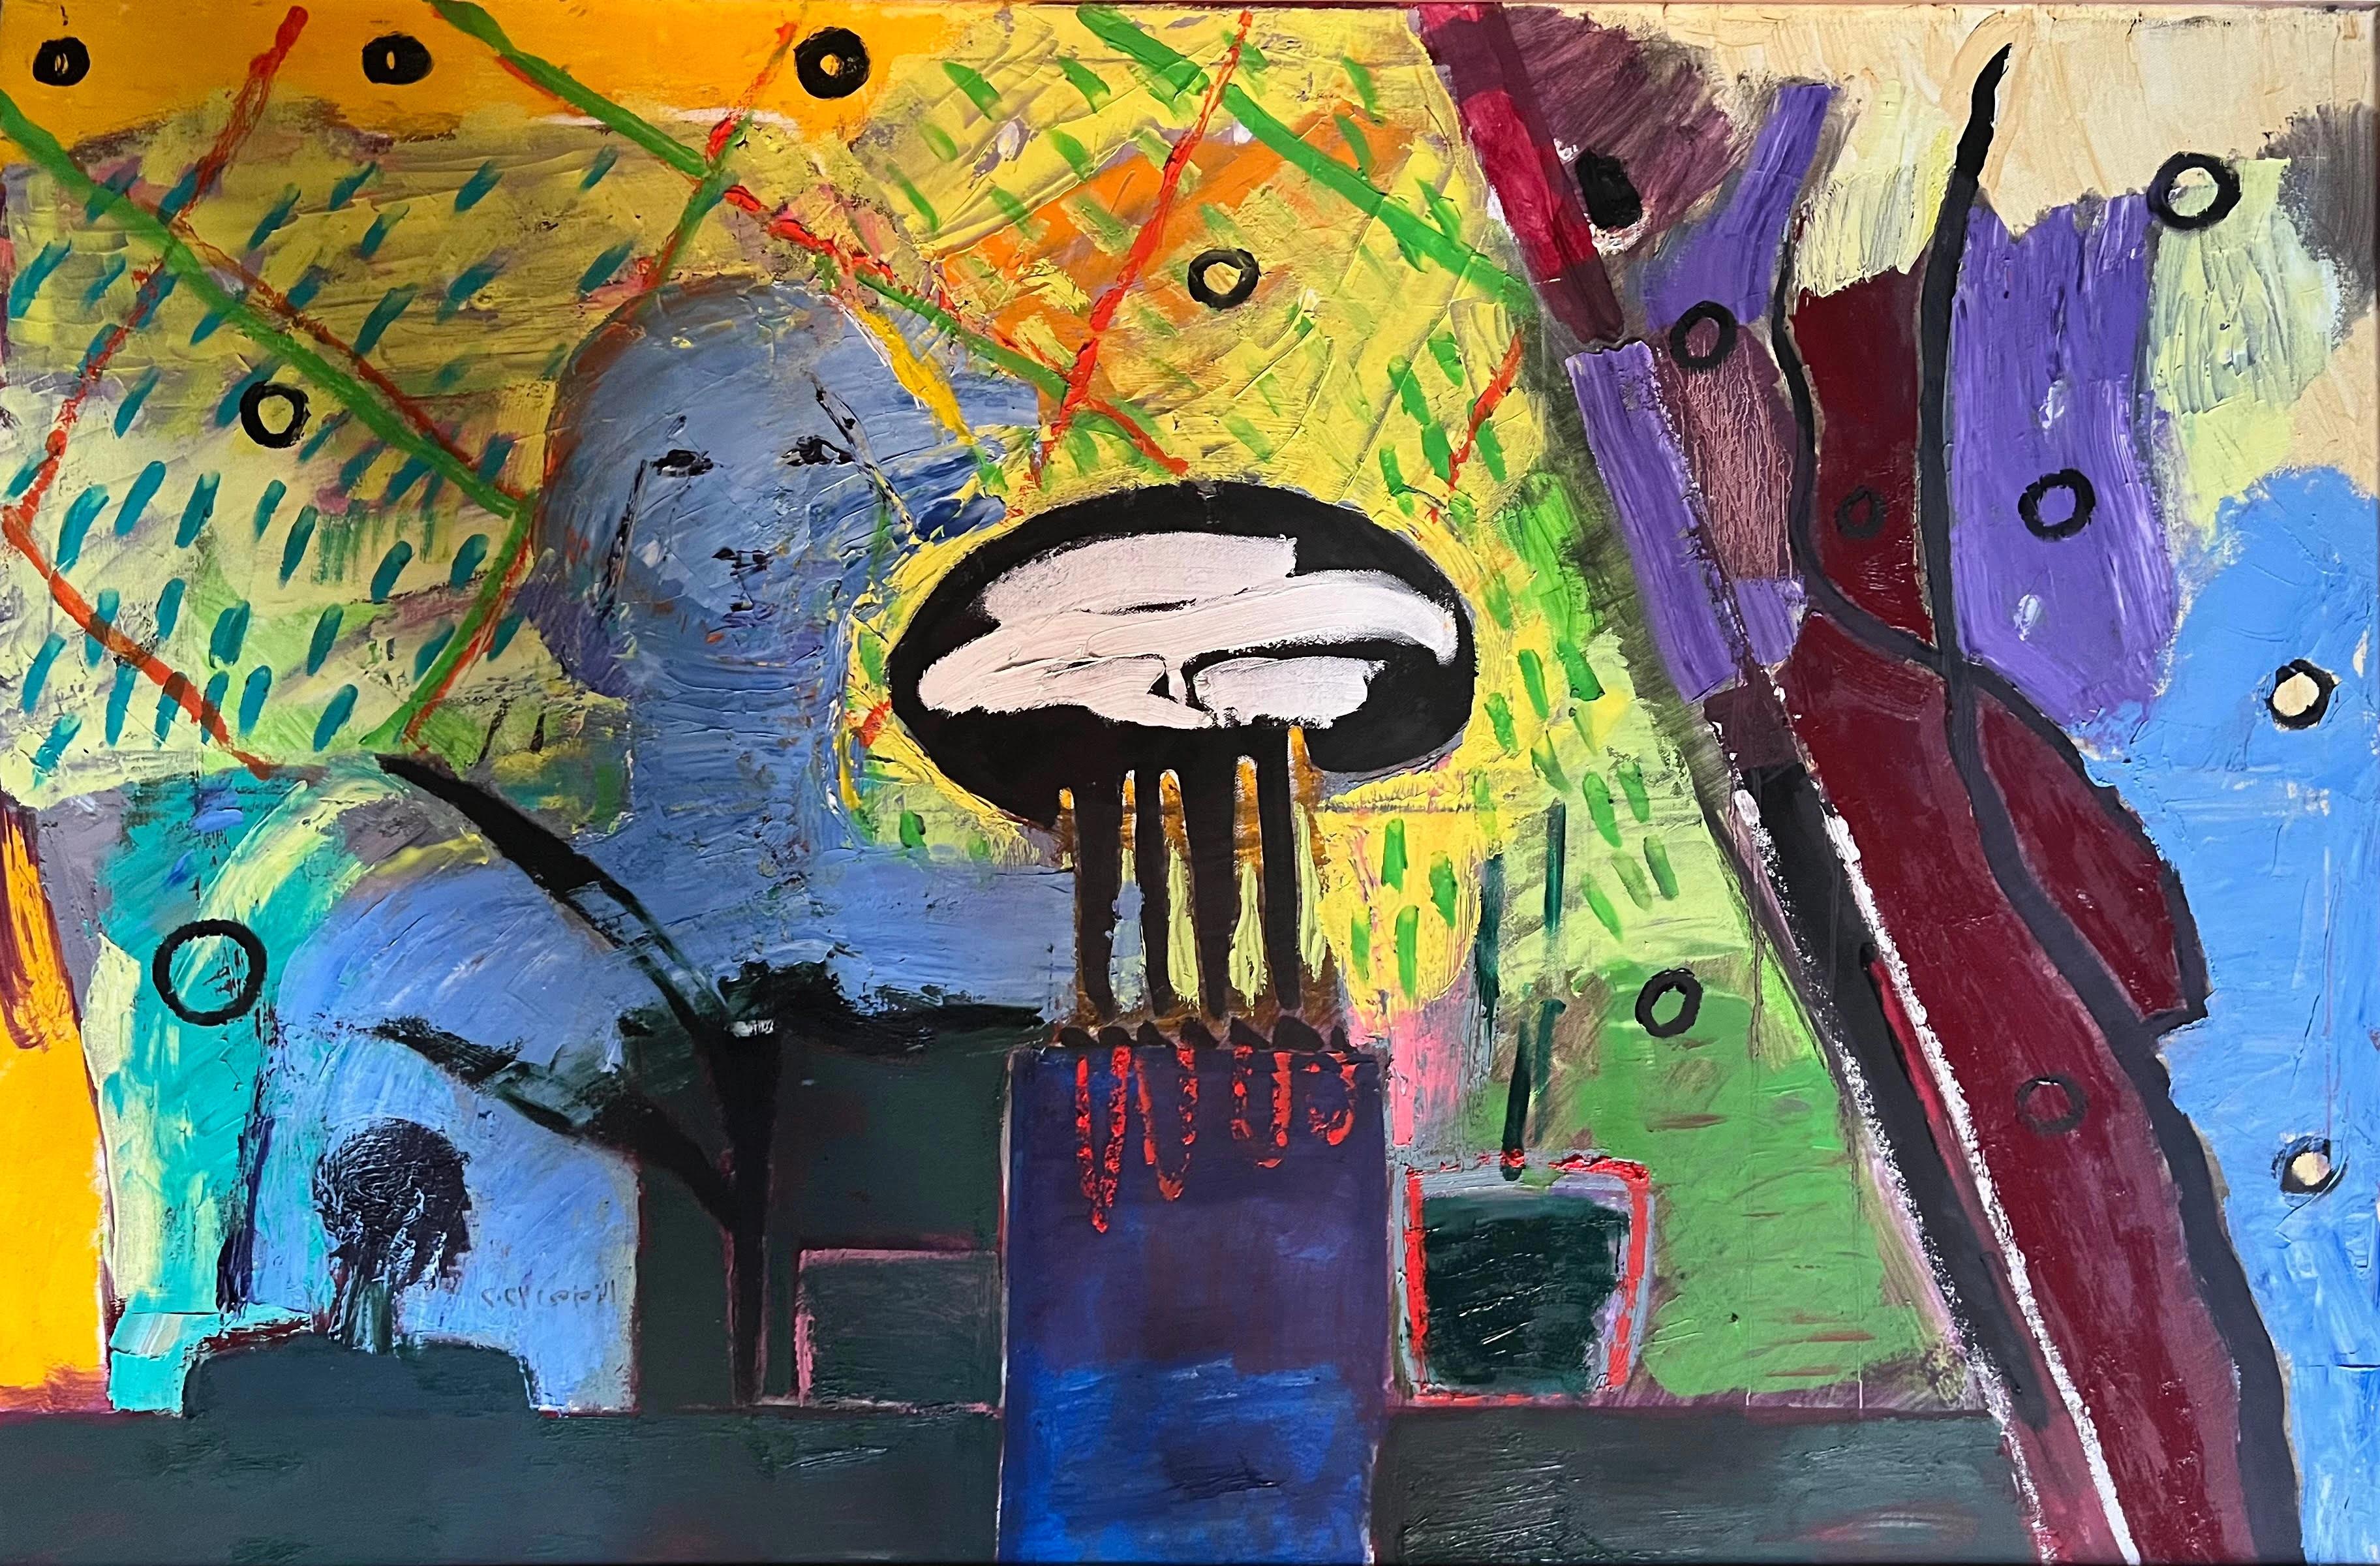 "Premonition" Abstract Oil Painting 32" x 47" inch by Ashraf Zamzami

Ashraf El Zamzami was a graduate of the Academy of Fine Arts in Minya, and he fast made a name for himself in the local art scene in the mid-1990s with his palpably naive yet